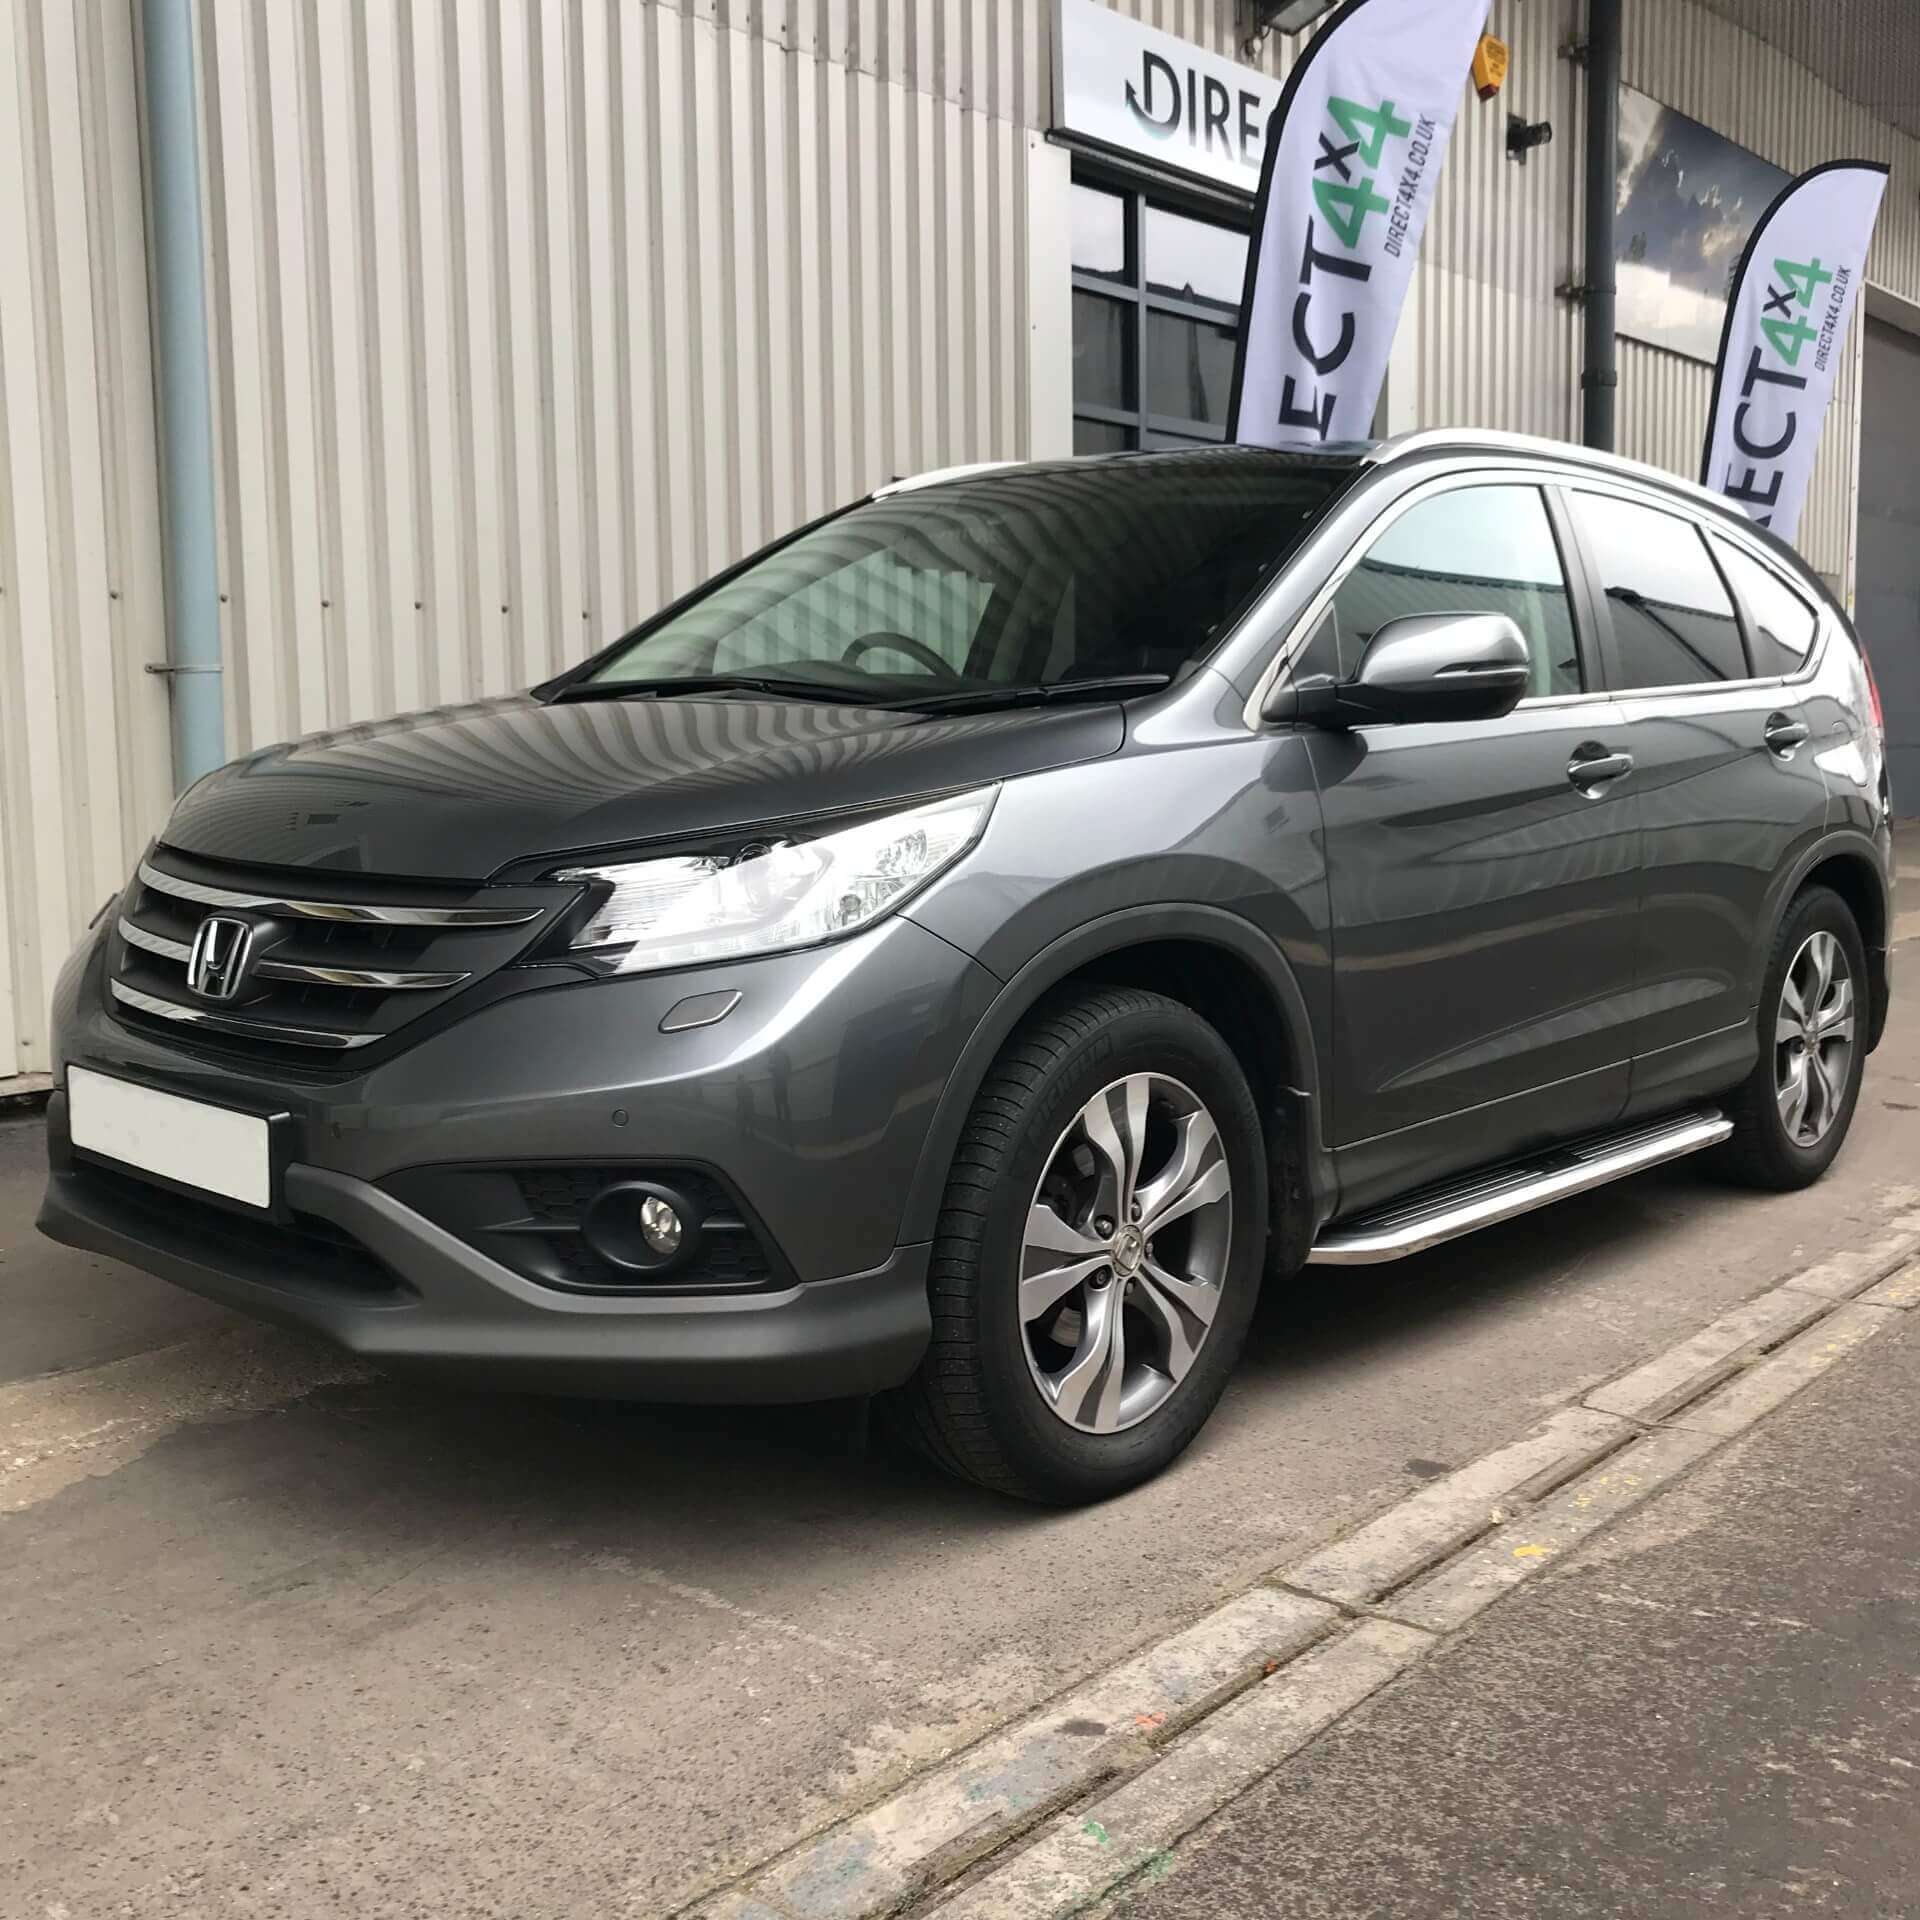 Direct4x4 accessories for Honda CR-V vehicles with a photo of a dark grey Honda CR-V with our premier side steps fitted parked outside our offices